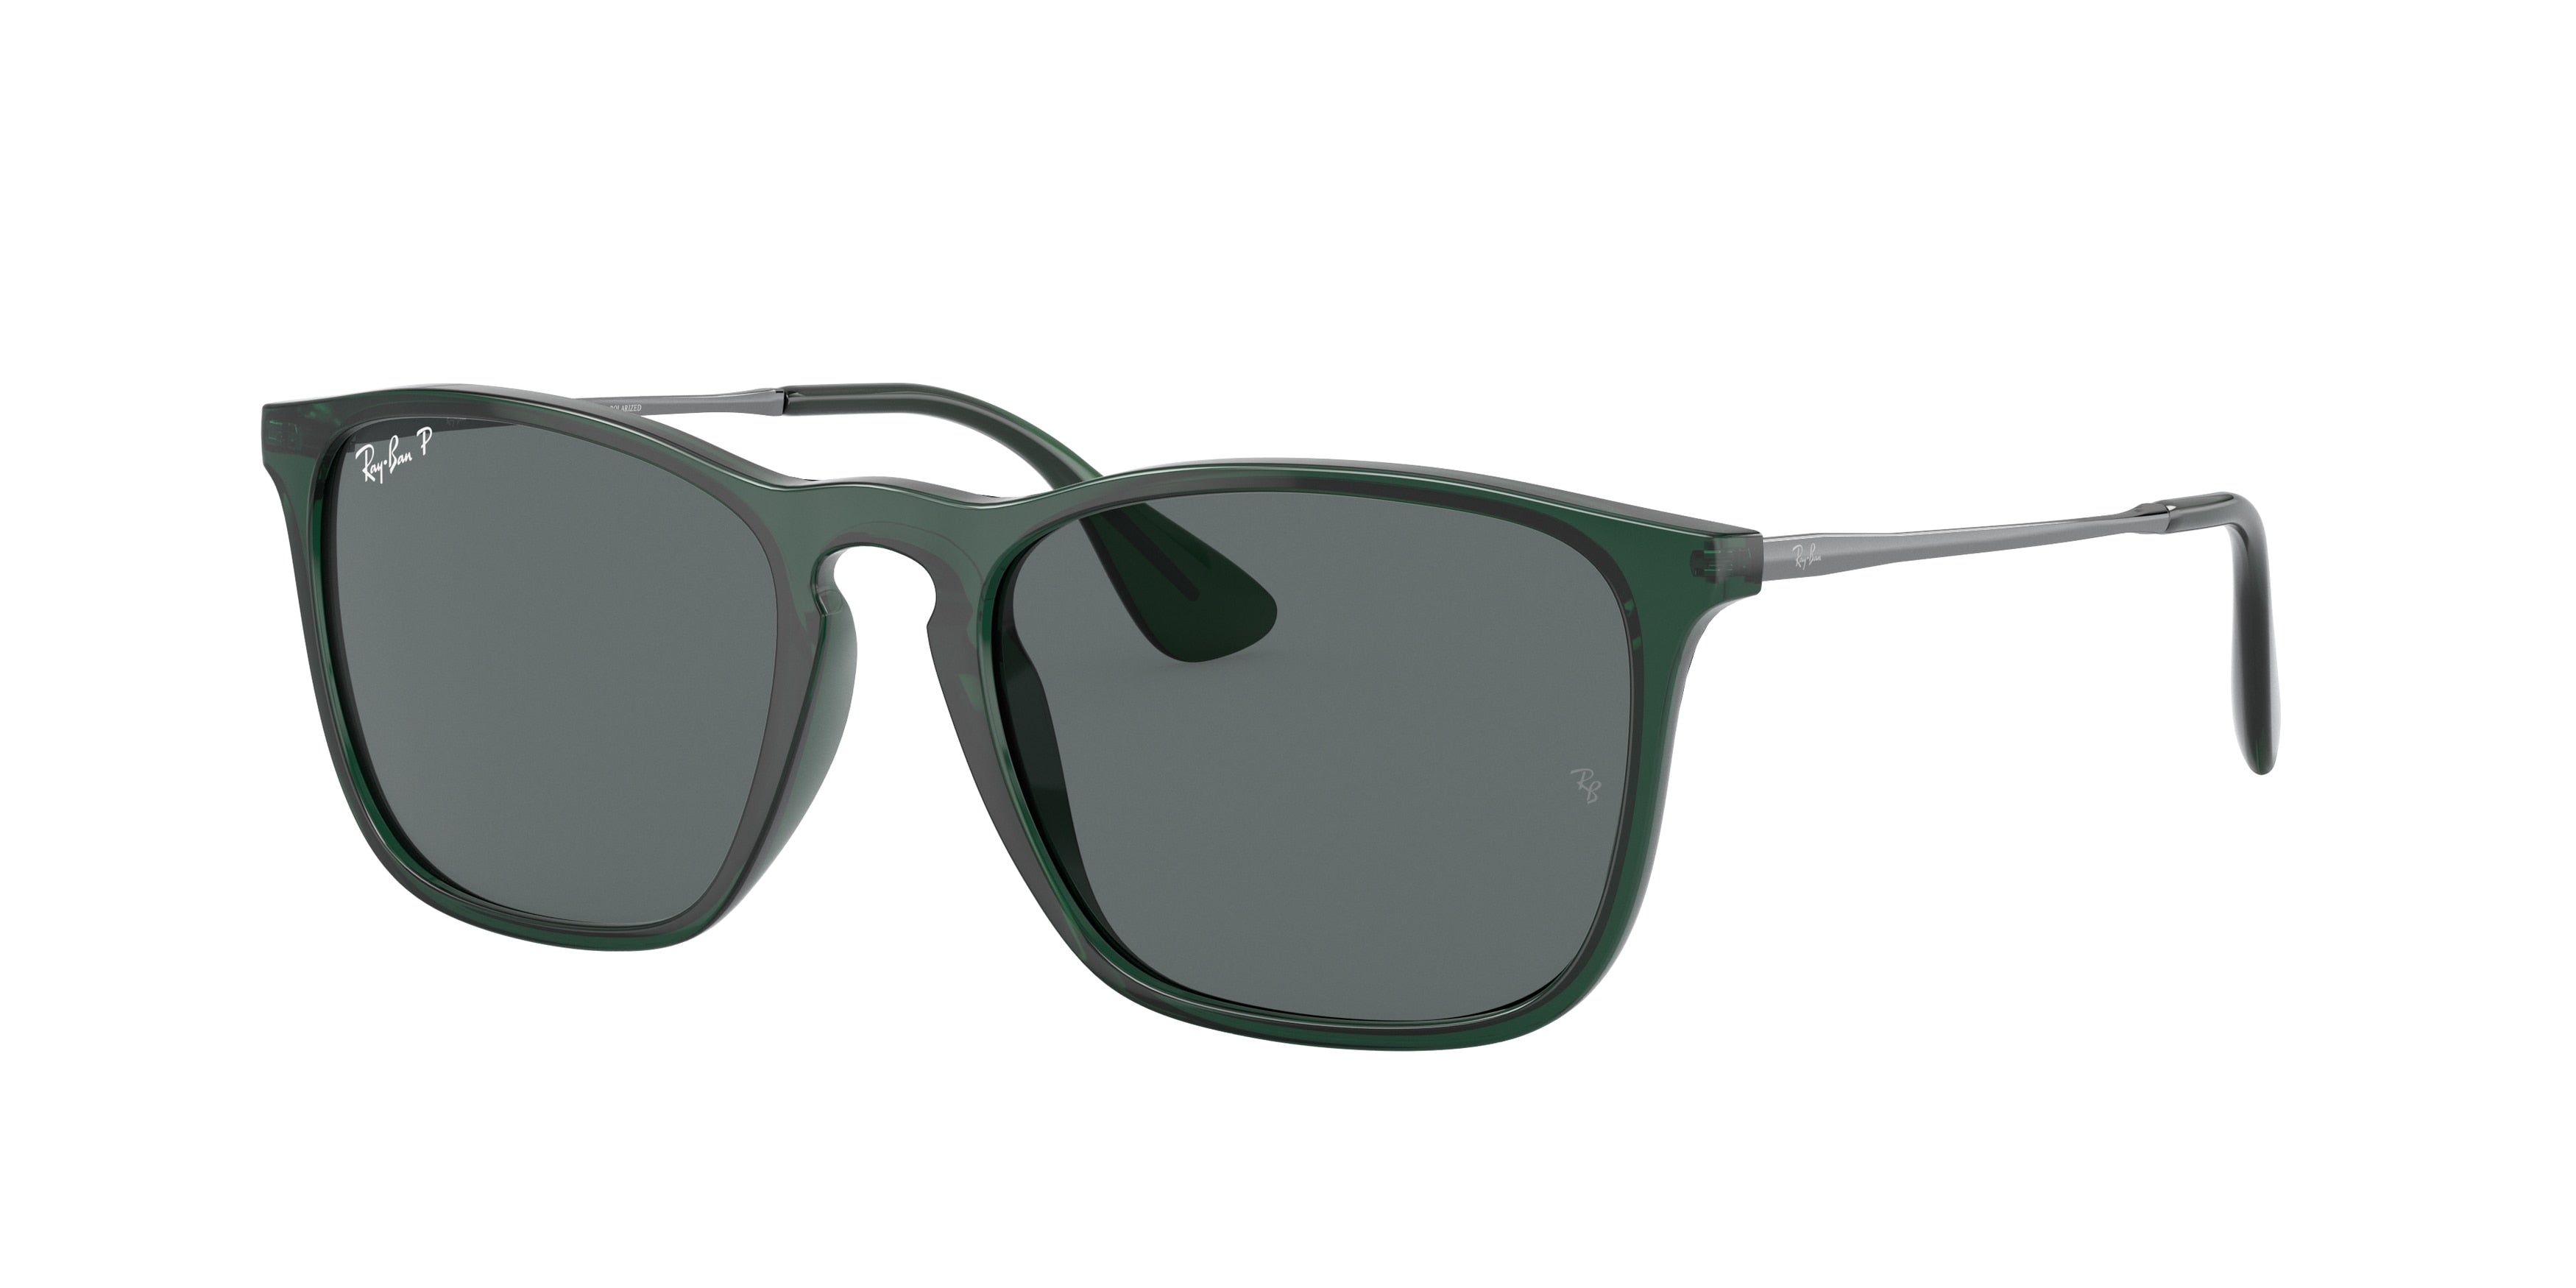 Ray-Ban CHRIS RB4187 Square Sunglasses  666381-Transparent Green 53-145-18 - Color Map Green